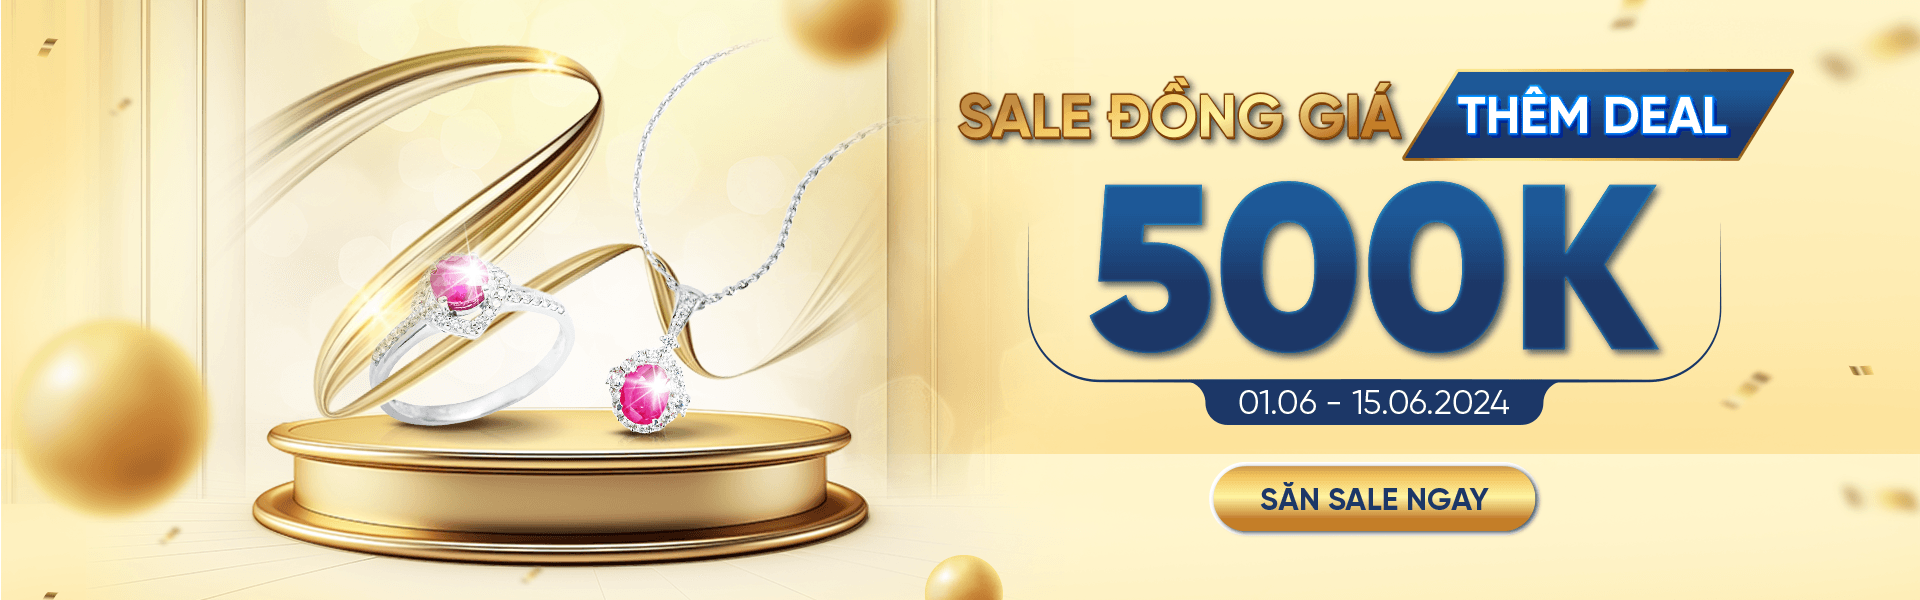 SALE DONG GIA